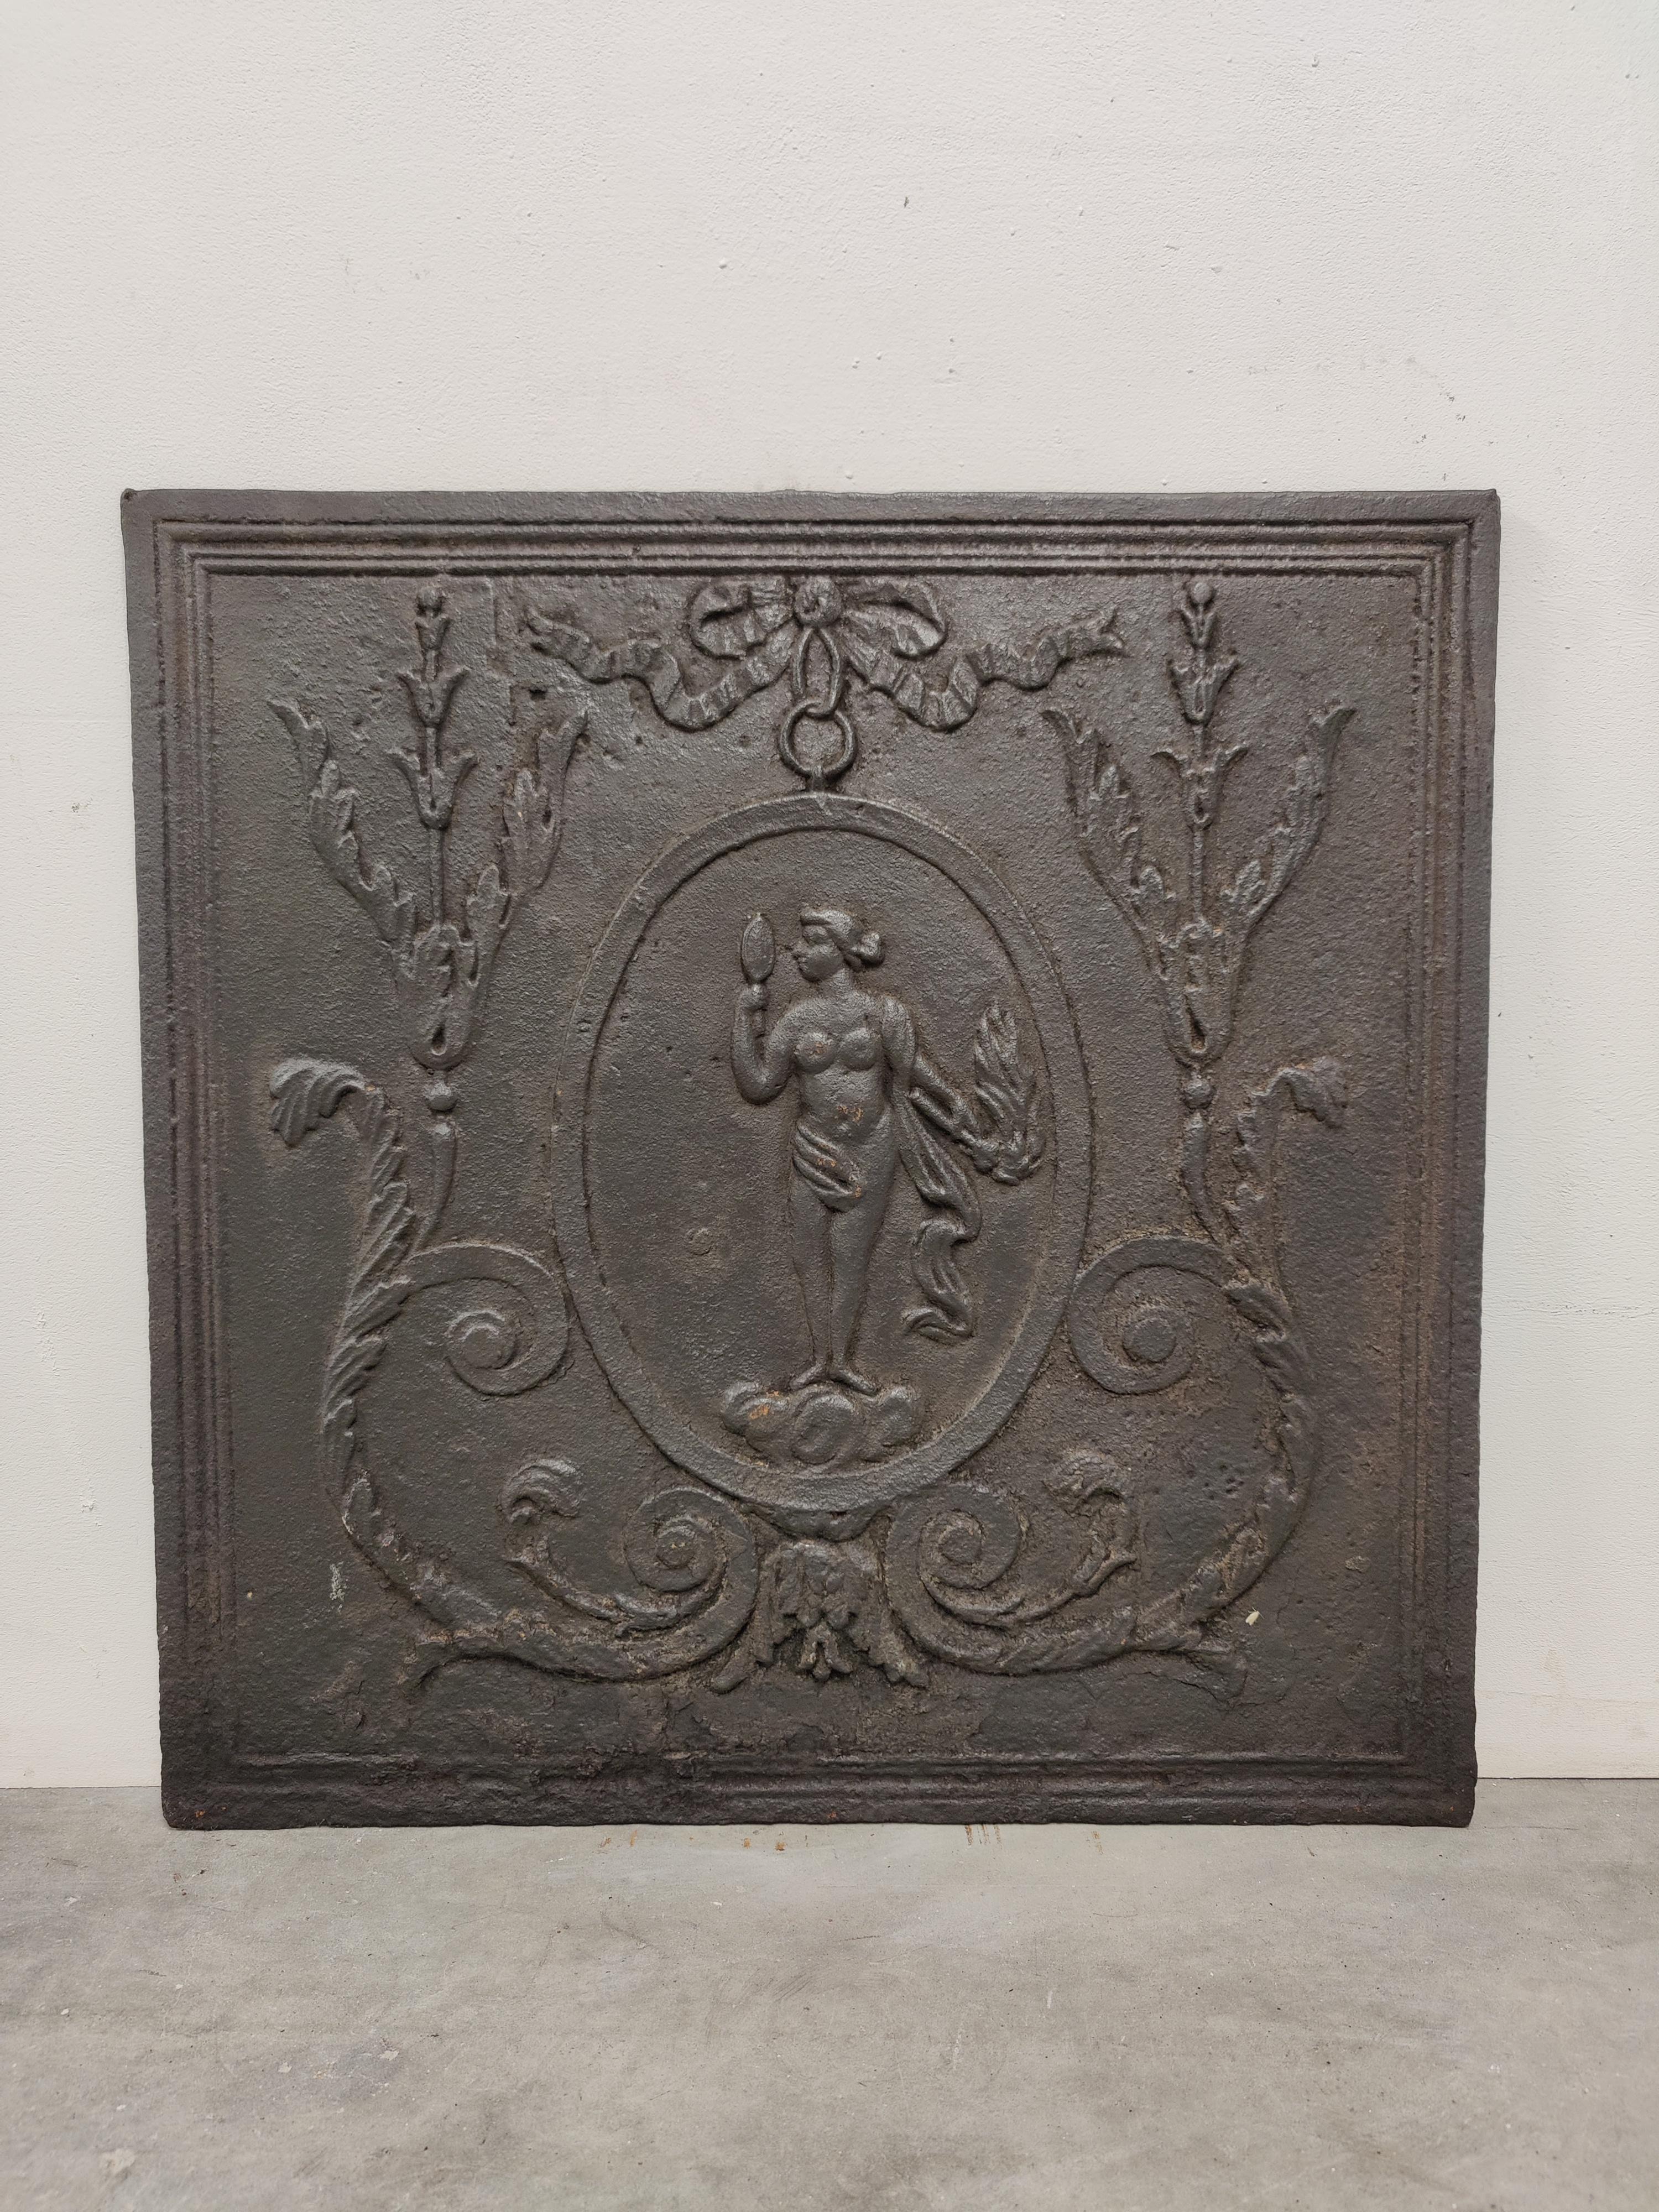 Antique fireback / backsplash showing a woman holding mirror.

Nice square cast iron antique fireback displaying a woman holding her mirror.
Great condition, can be used in a real gas or log fire.
Very decorative piece.
67 lbs / 30 kg.


 